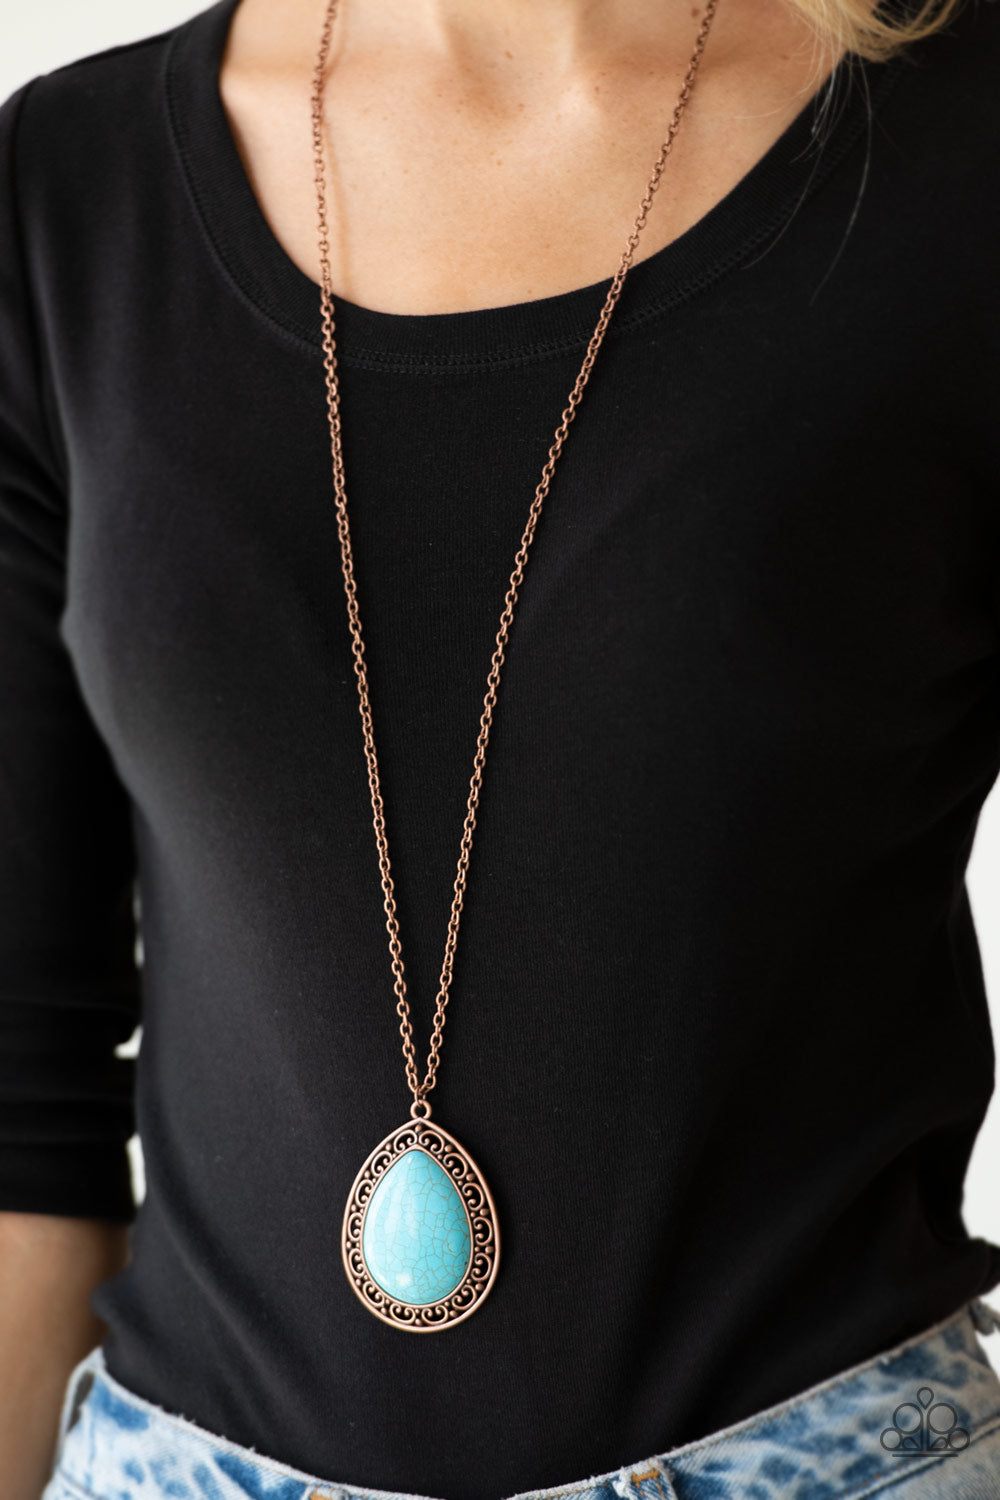 FULL FRONTIER - COPPER TURQUOISE TEARDROP NECKLACE